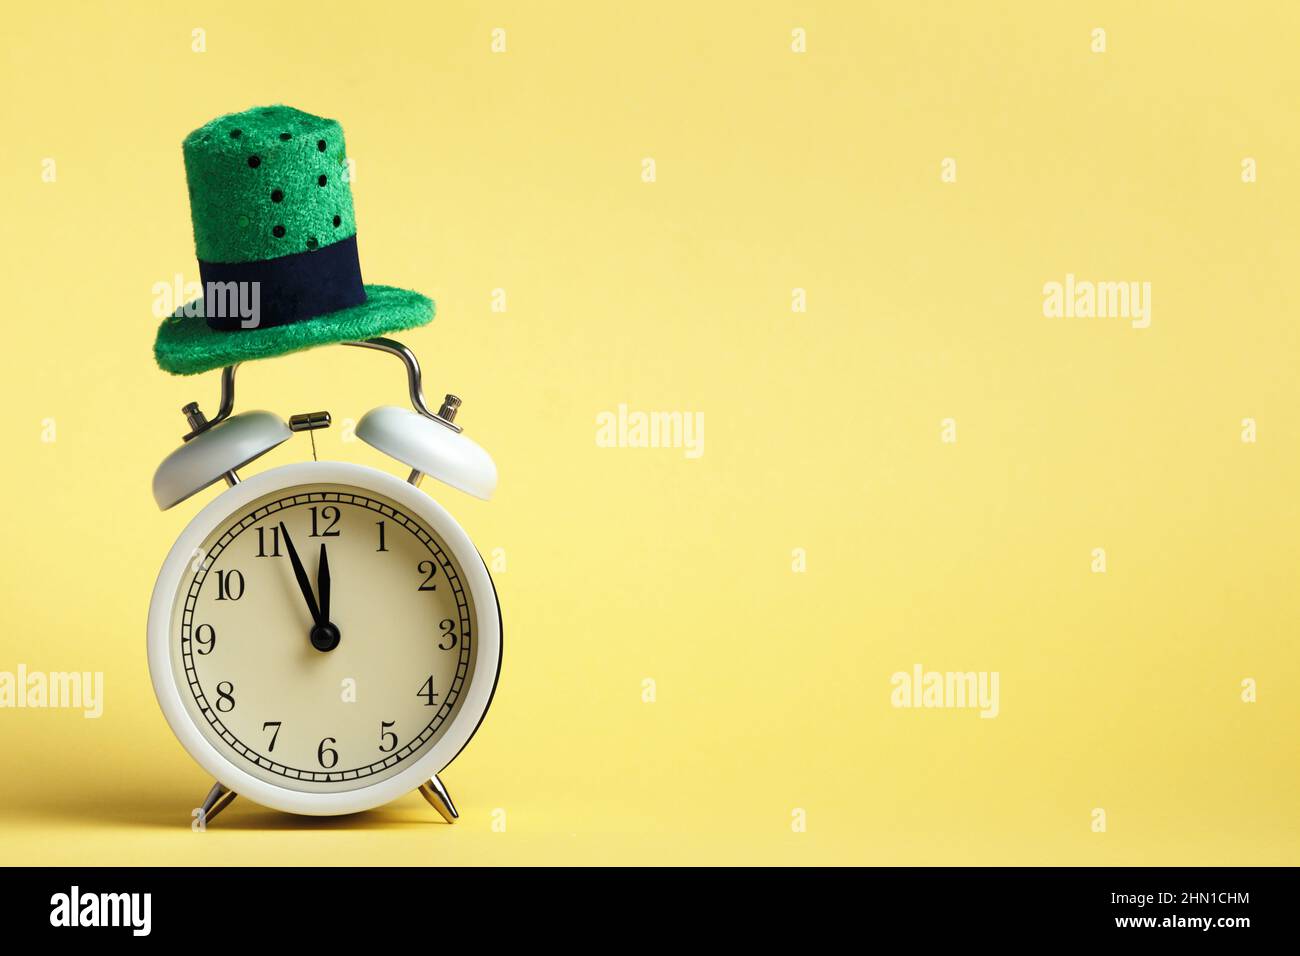 St. Patricks Day celebration concept. Alarm clock in a green hat on a yellow background. Stock Photo